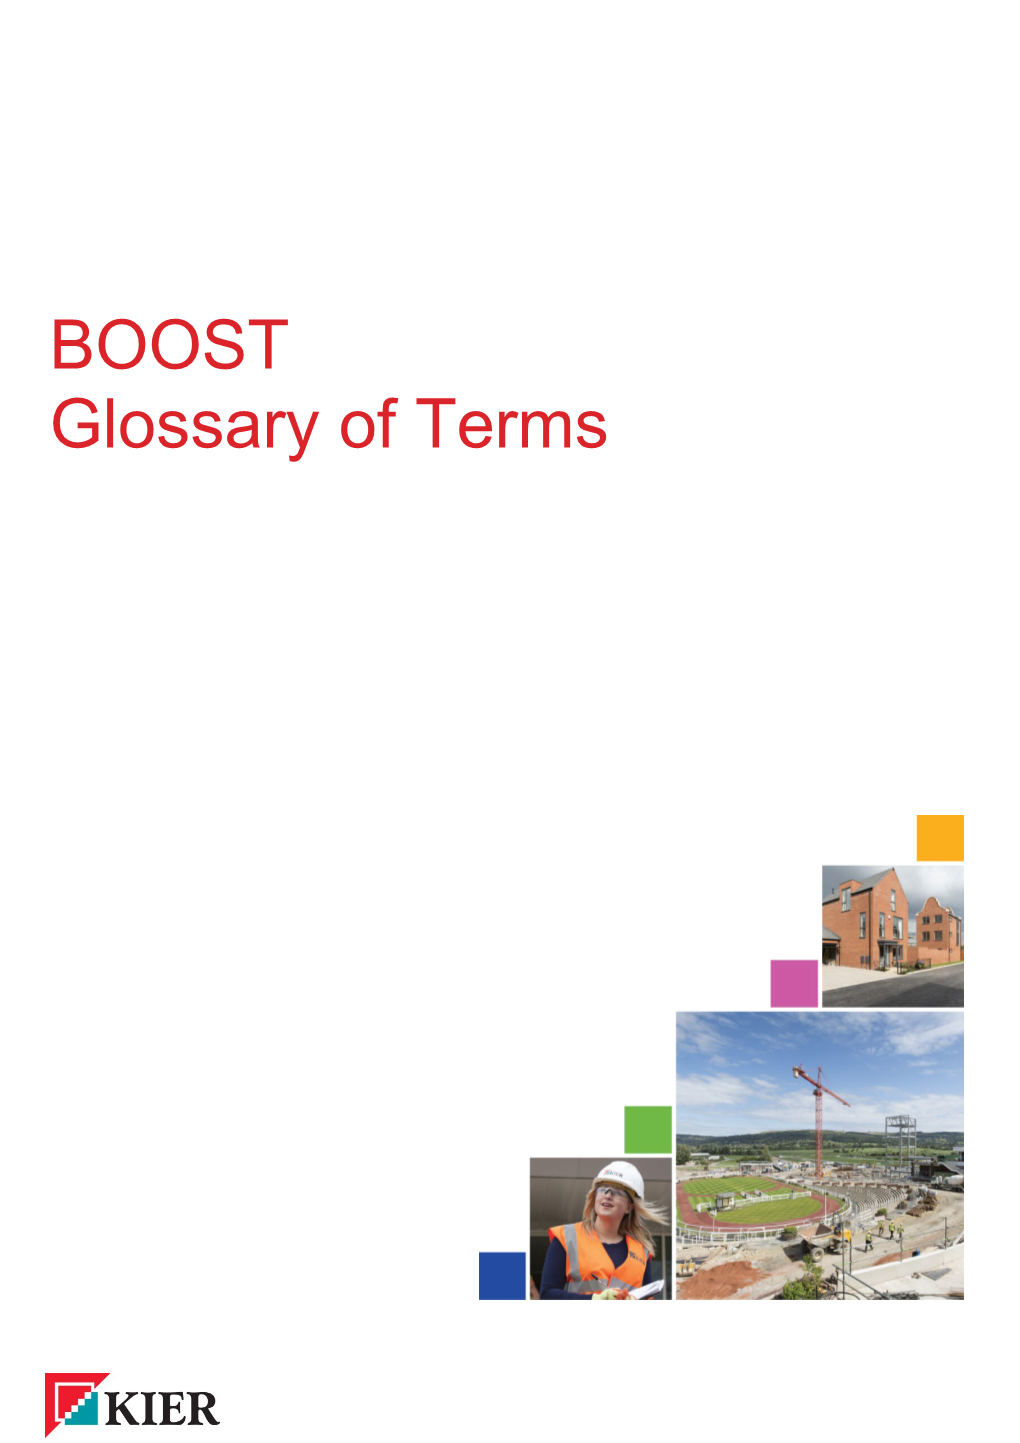 BOOST Glossary of Terms May 2016